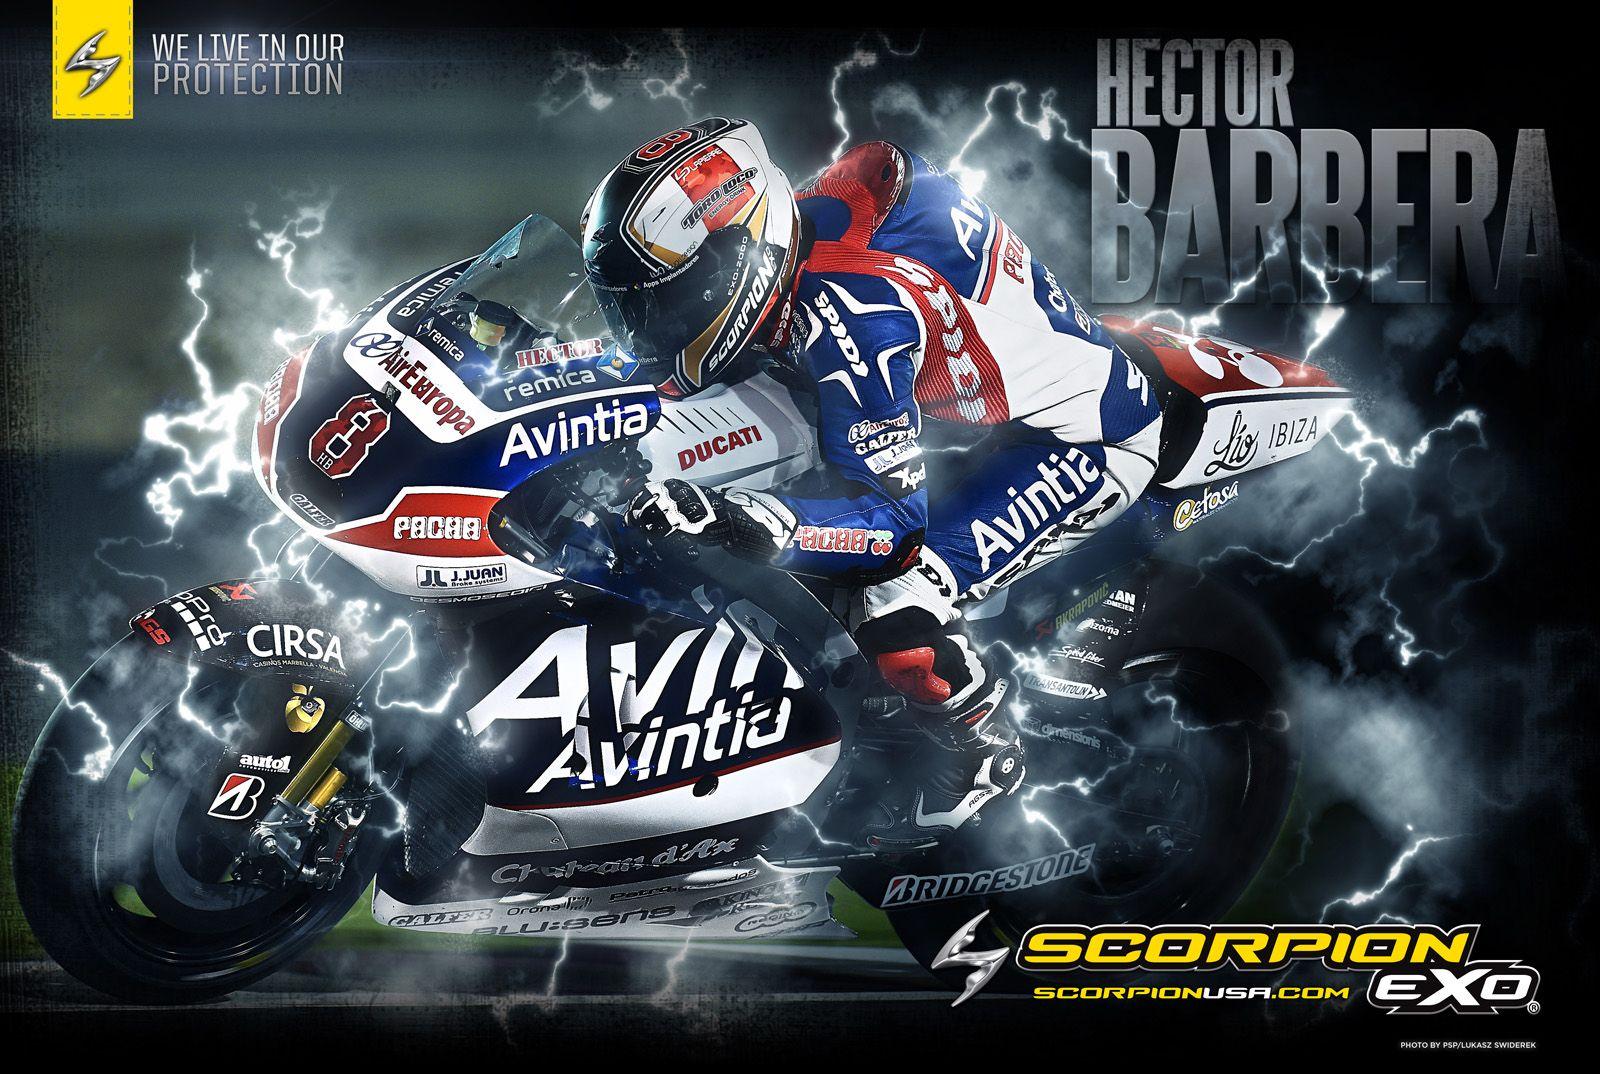 Scorpion Sports Inc. USA - Motorcycle Helmets and Apparel